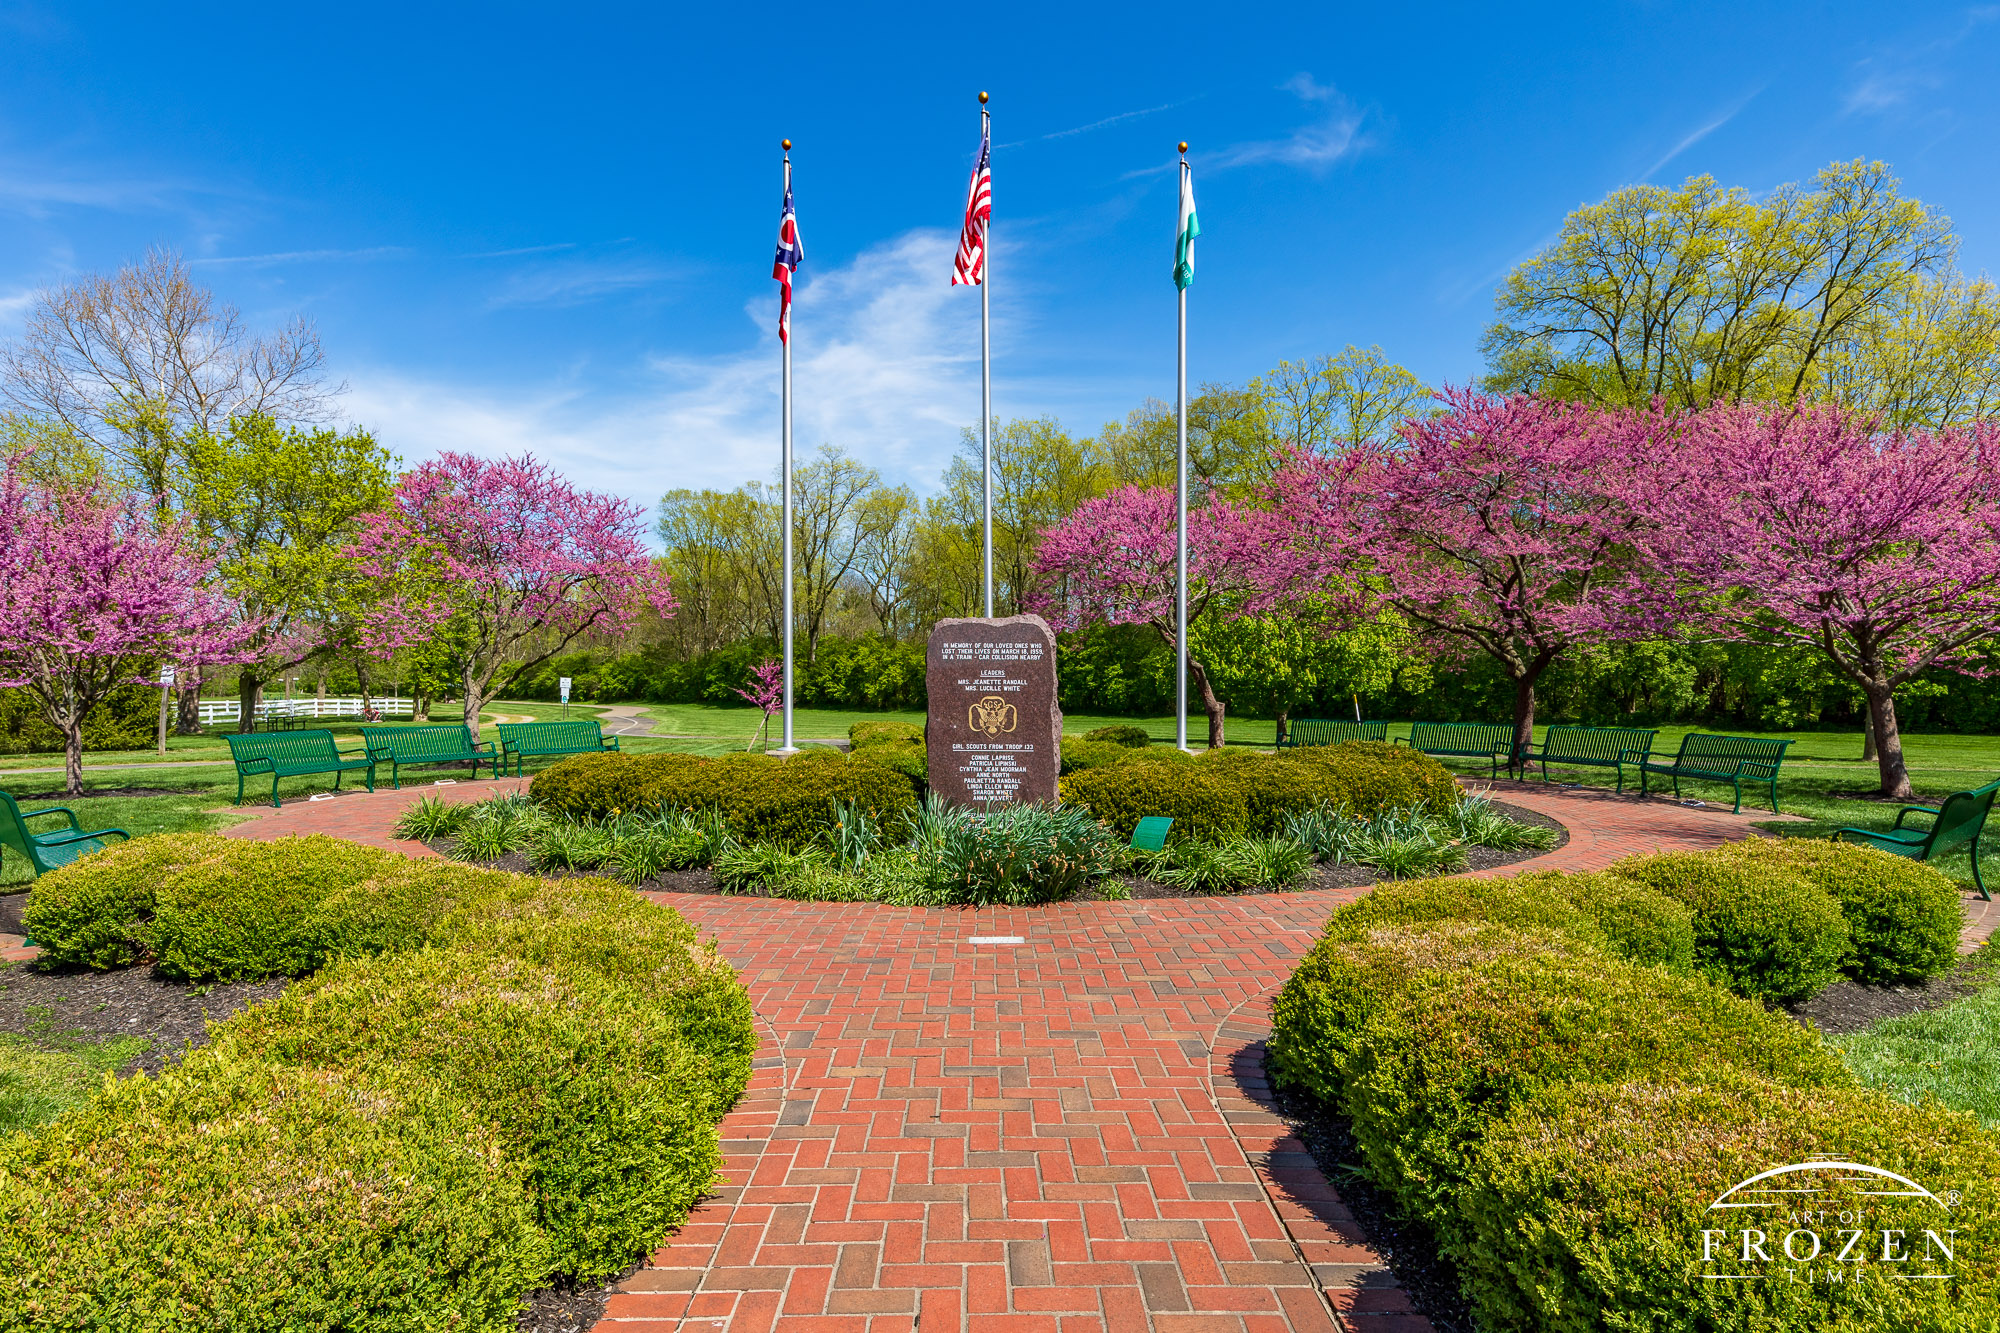 A memorial to local girl scouts surrounded by a flag display and eastern red bud trees